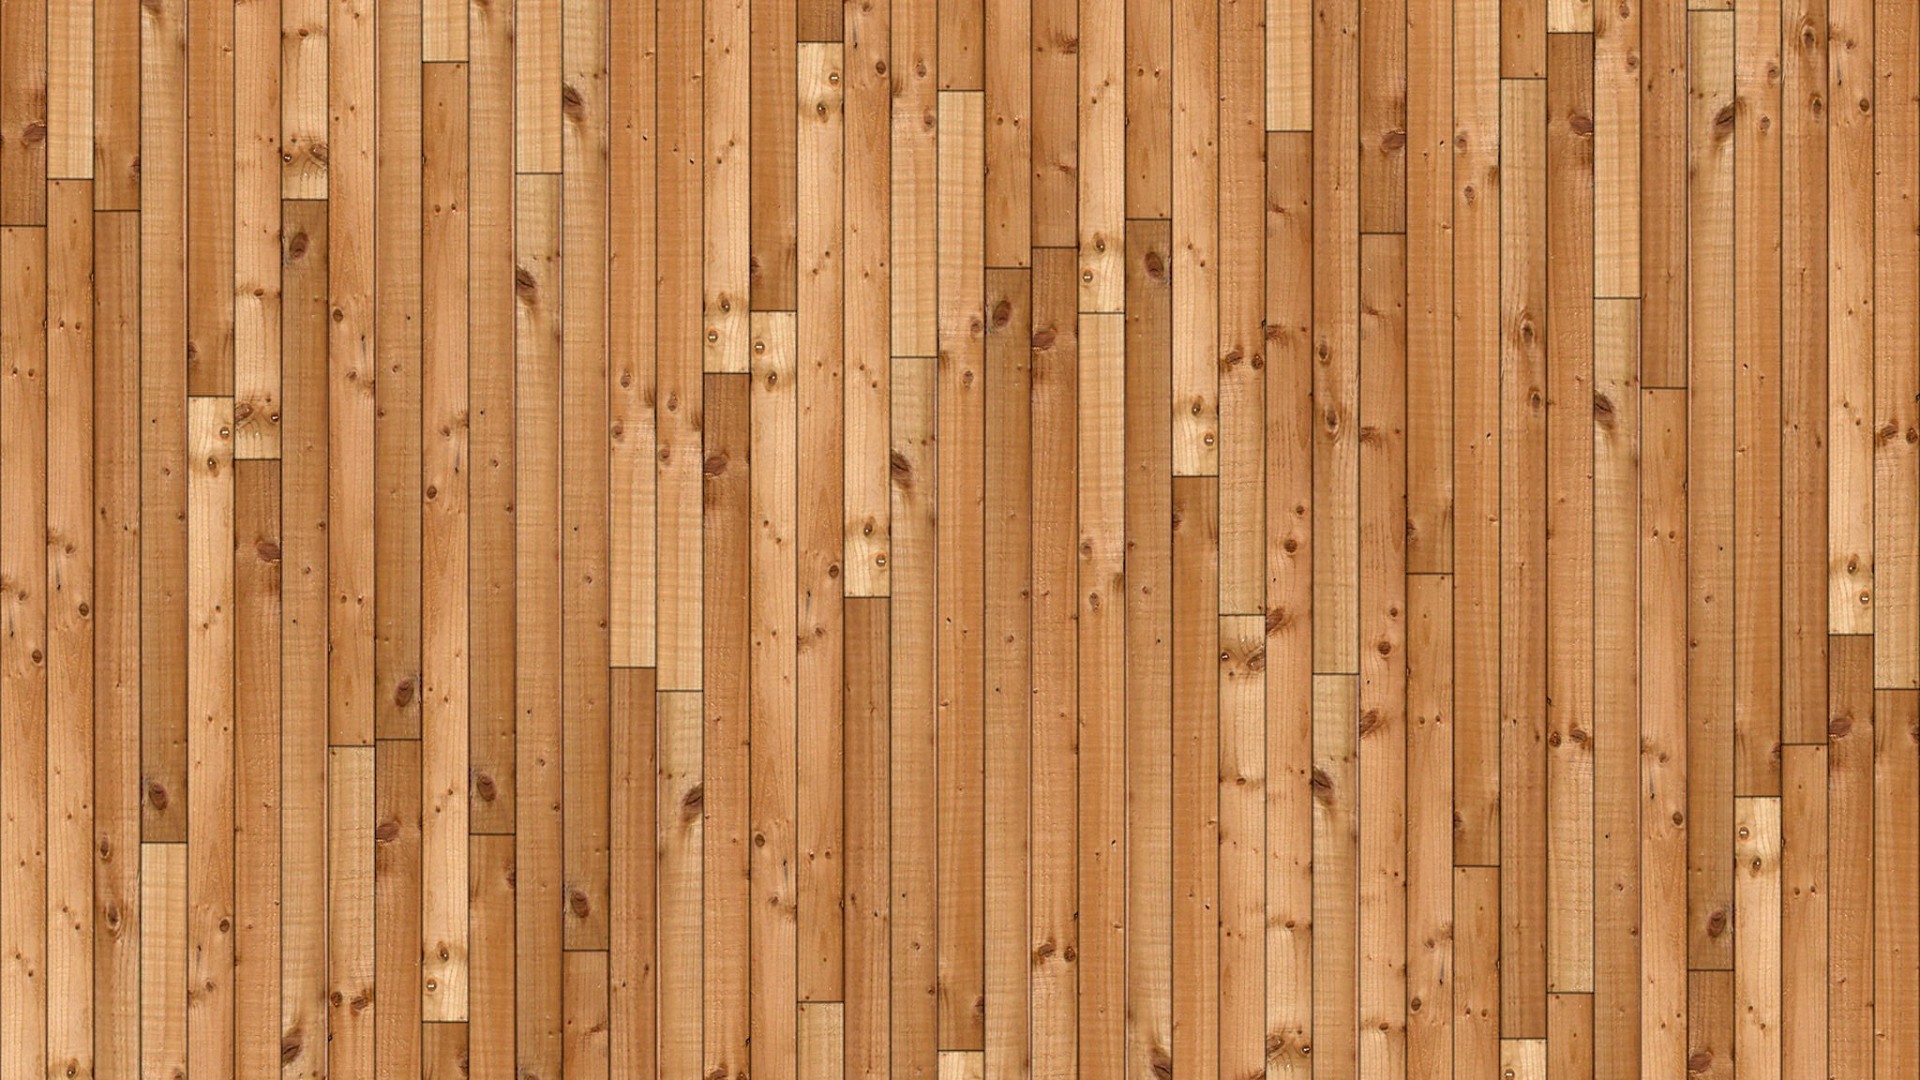 35 HD Wood Wallpapers Backgrounds For Free Download